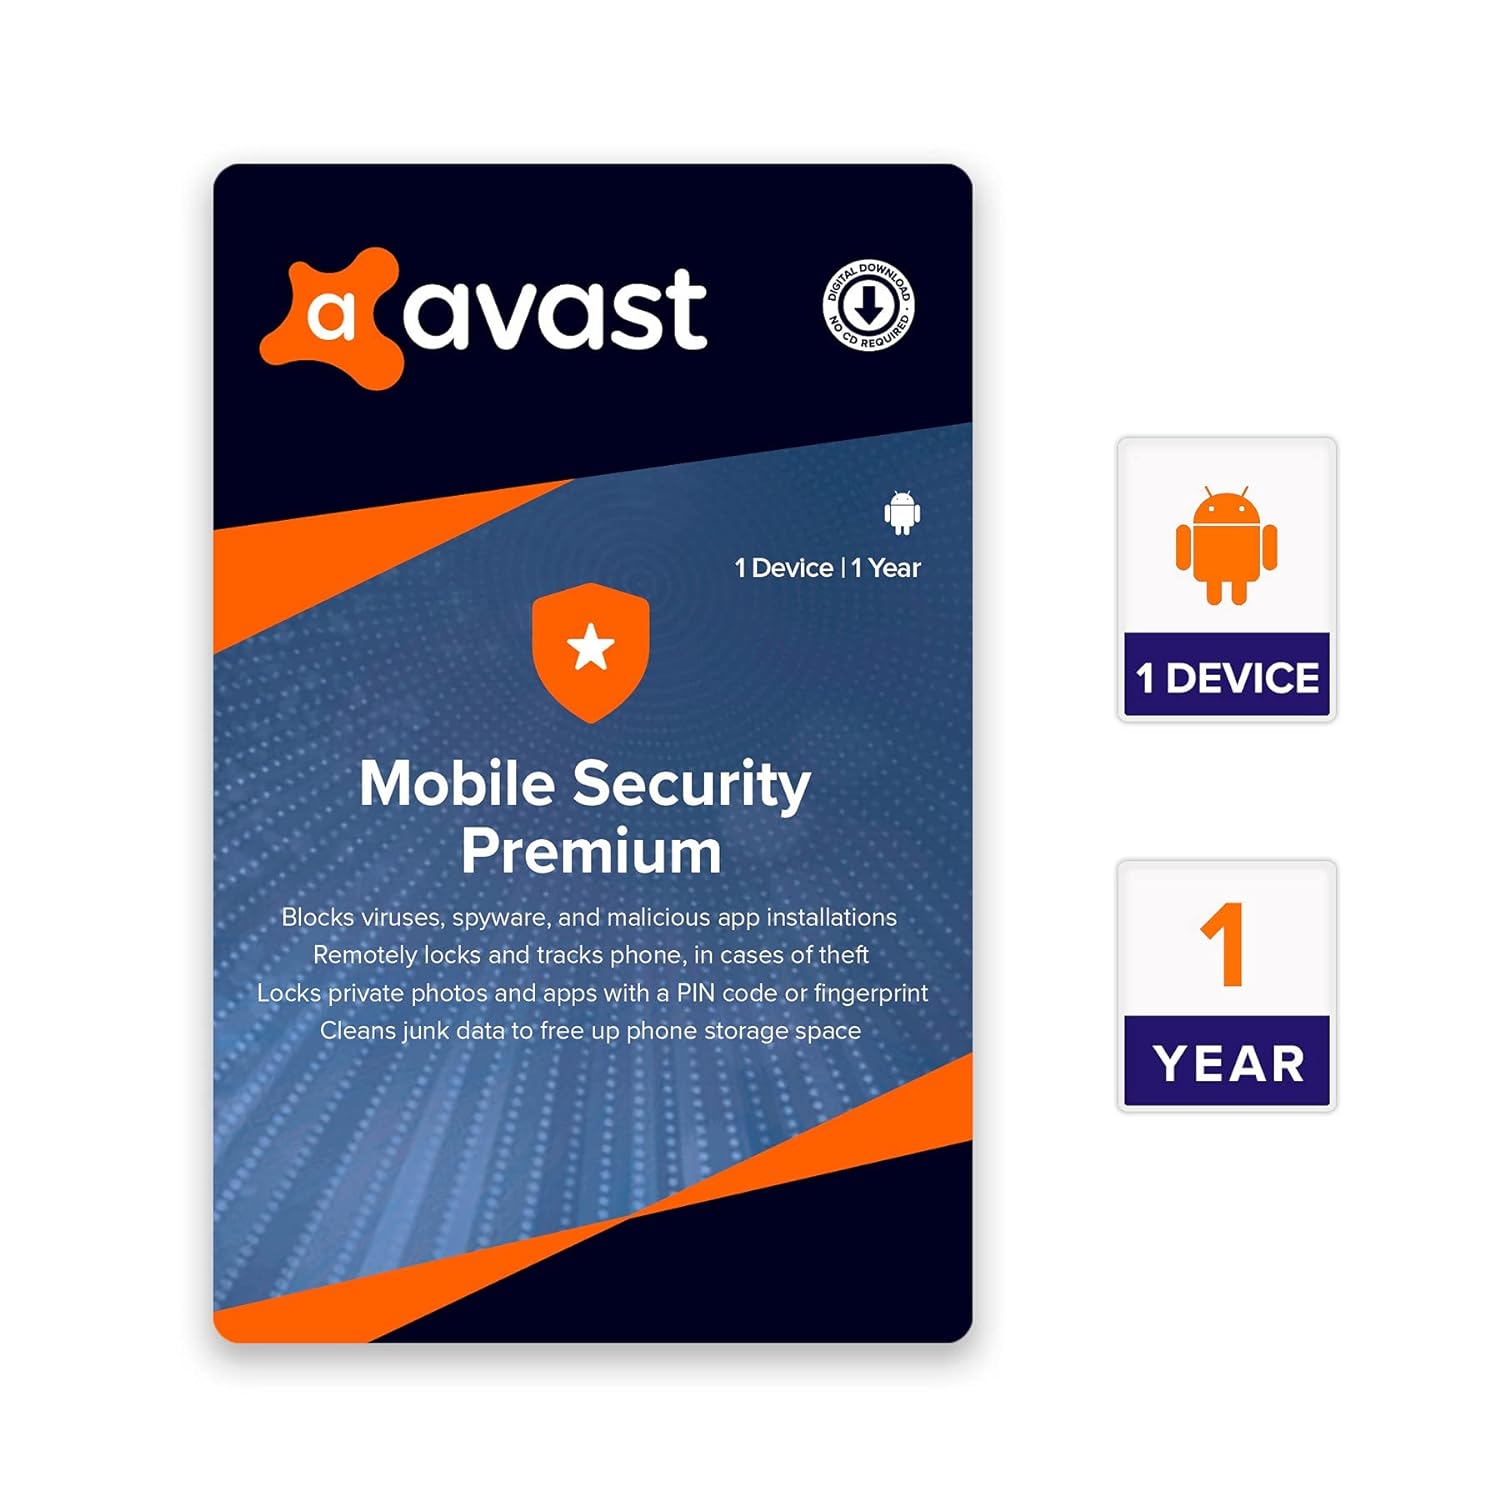 Avast Ultimate Mobile Security Premium for Android 2023 Key (1 Year / 1 Device), 7.41 usd